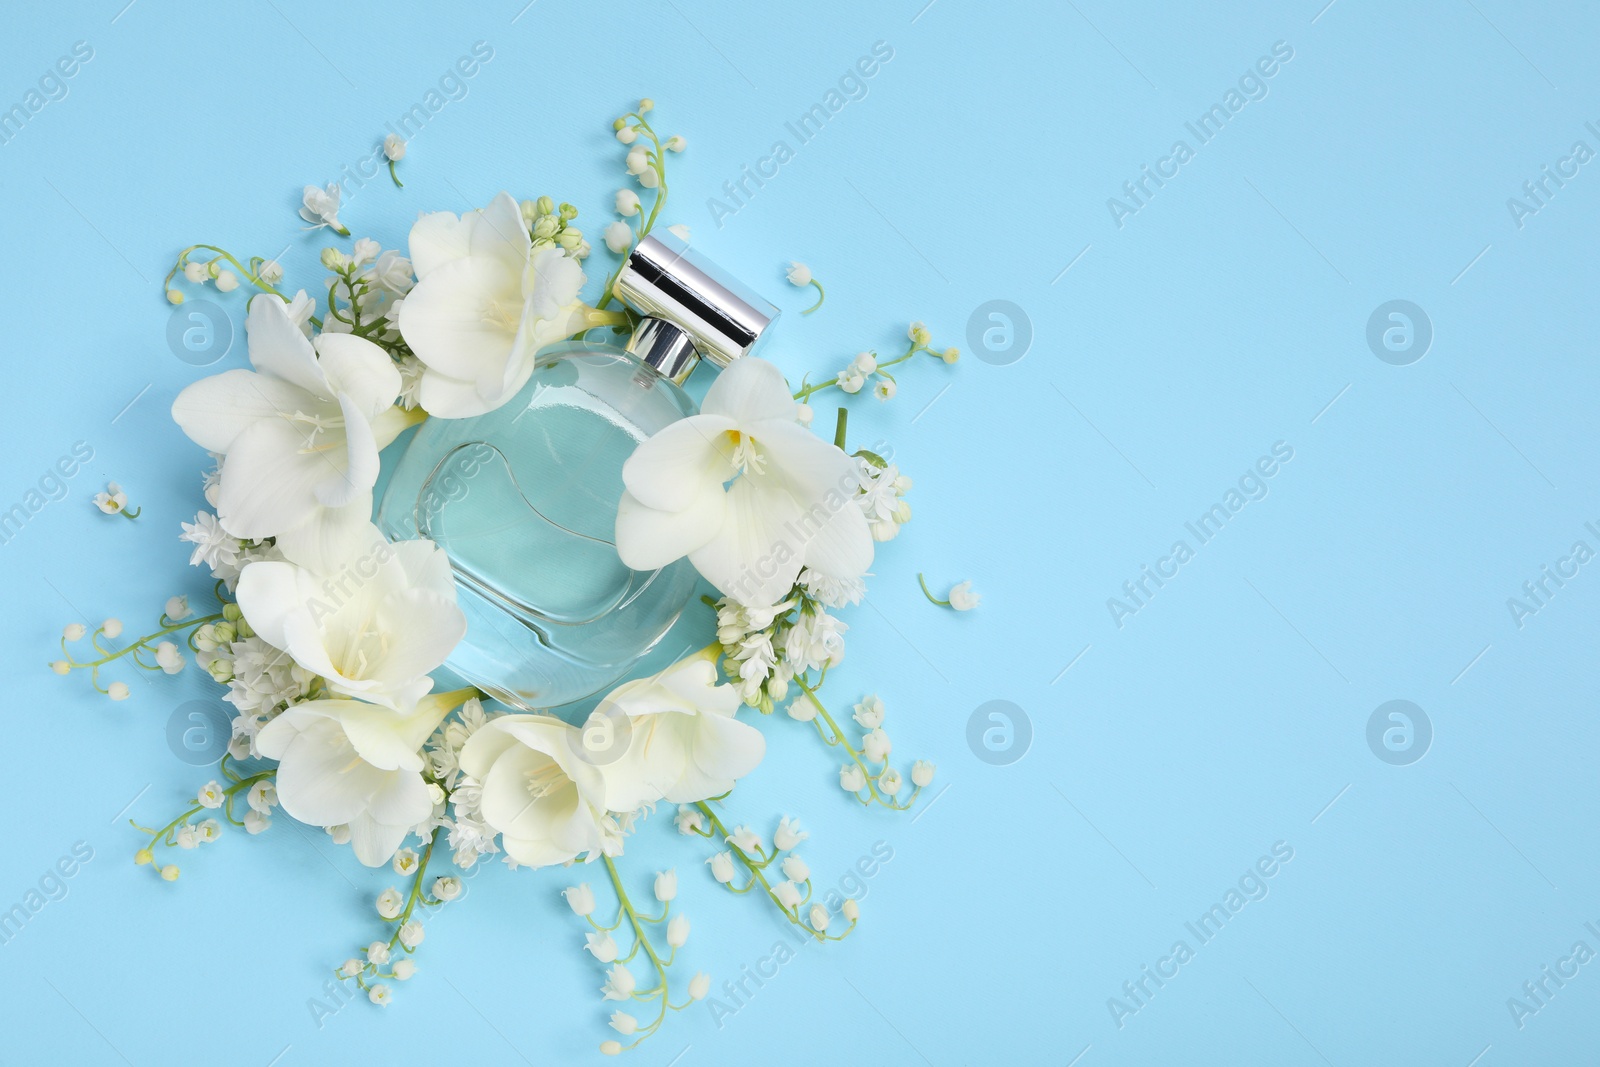 Photo of Luxury perfume and floral decor on light blue background, flat lay. Space for text